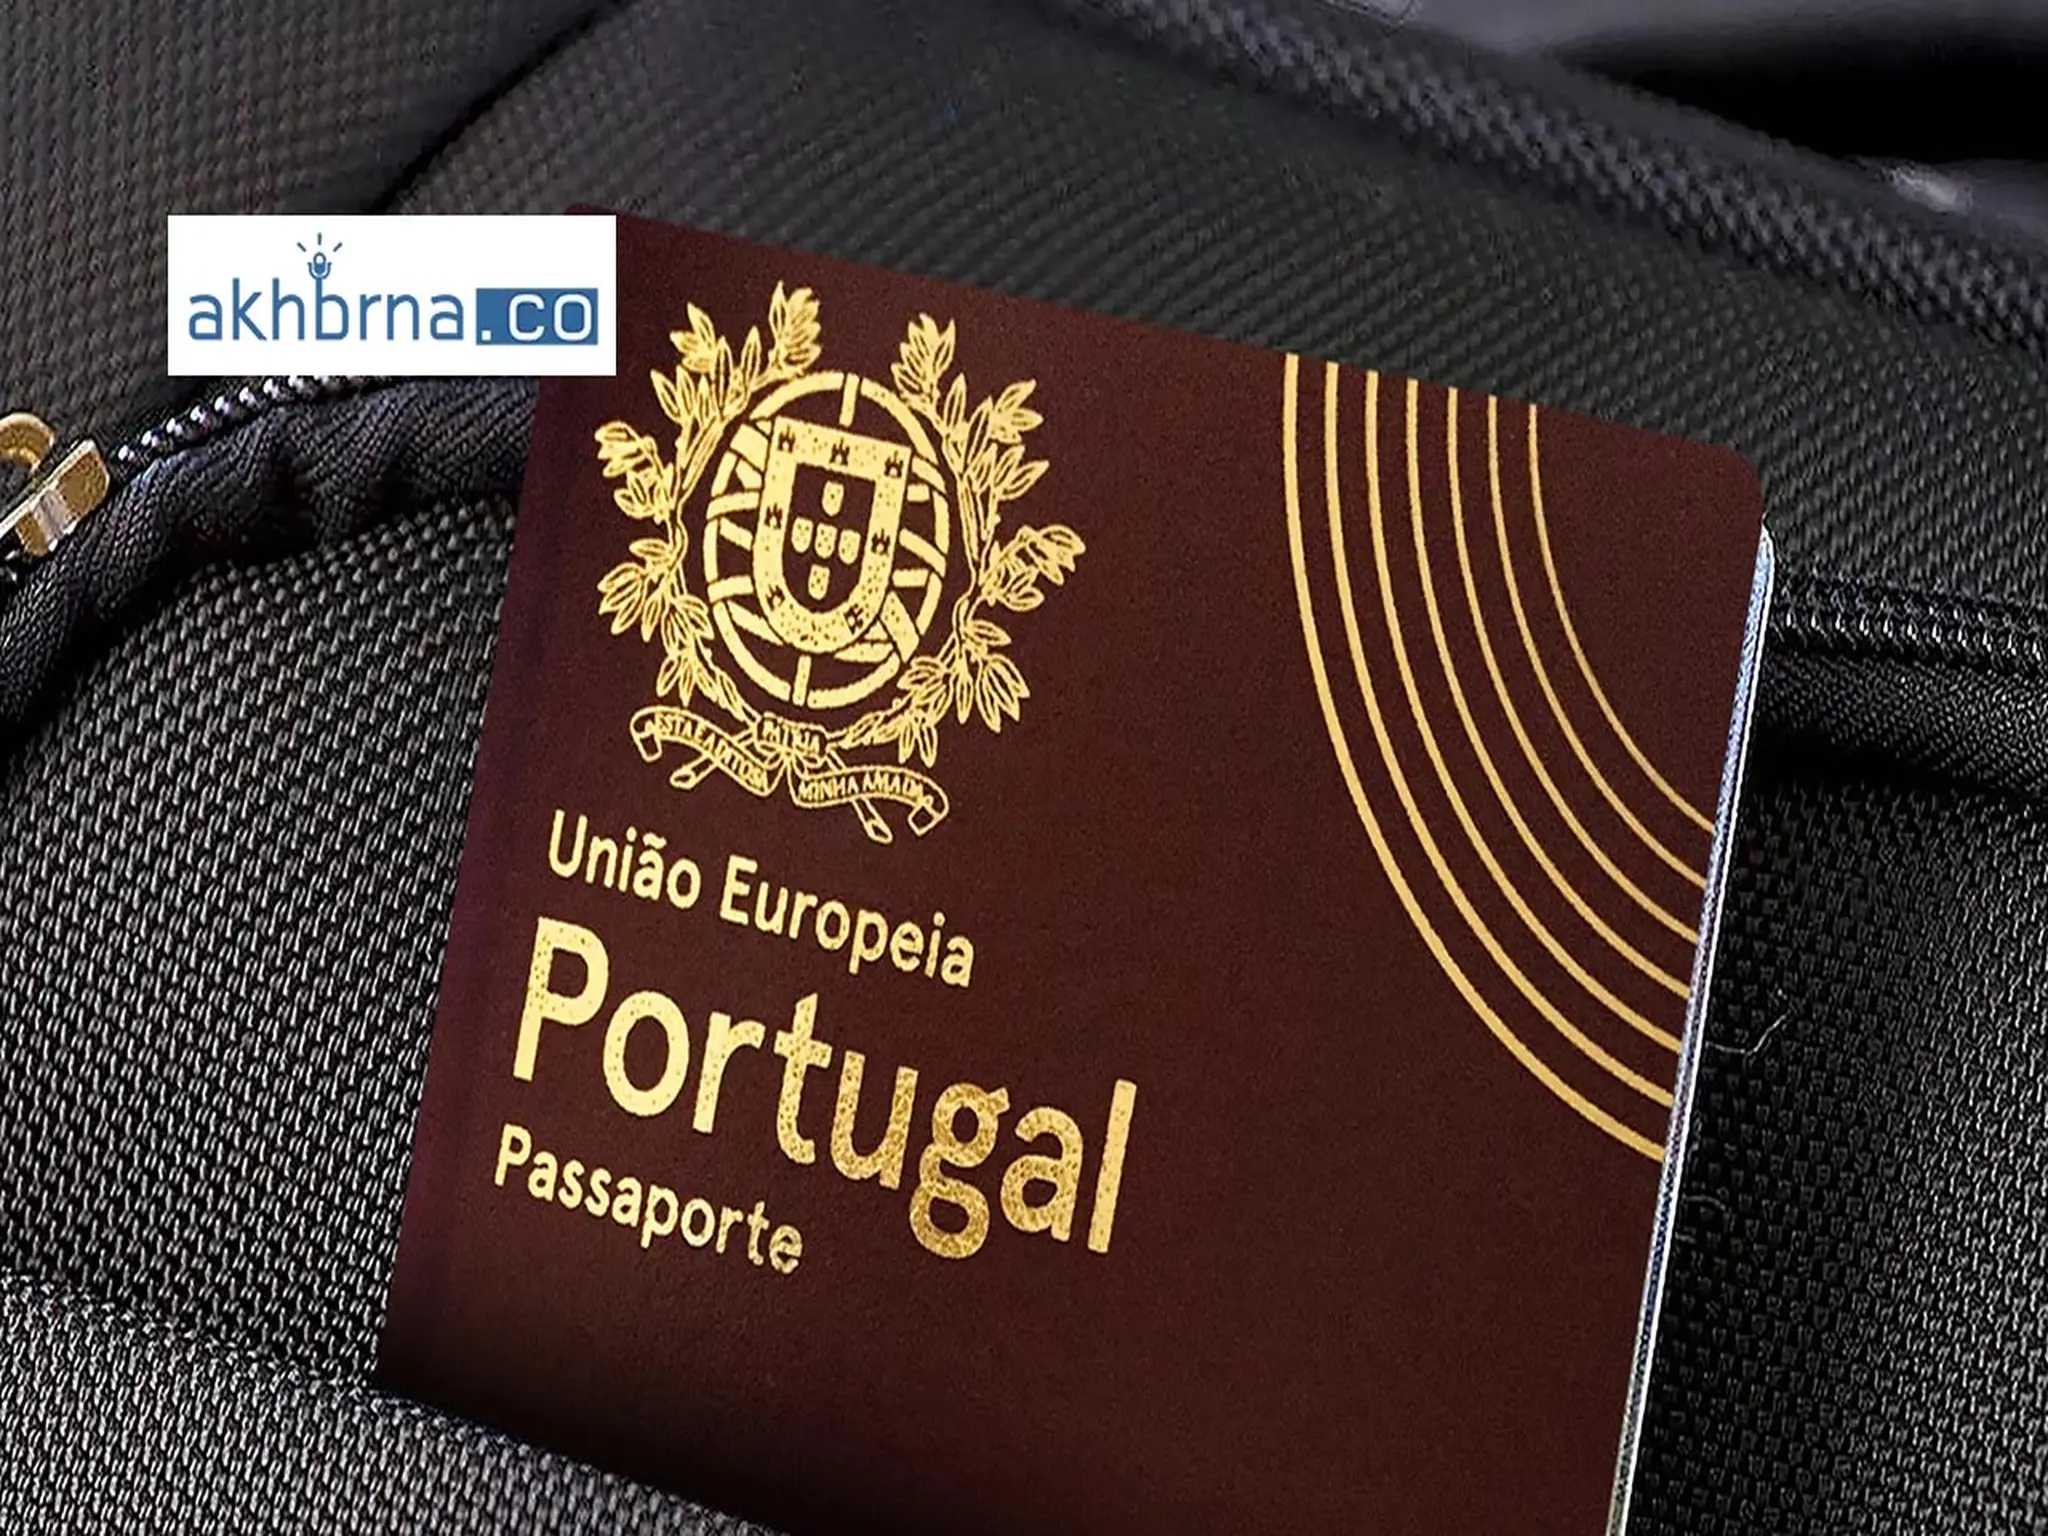 Conditions for obtaining a Portugal visa for a Pakistani